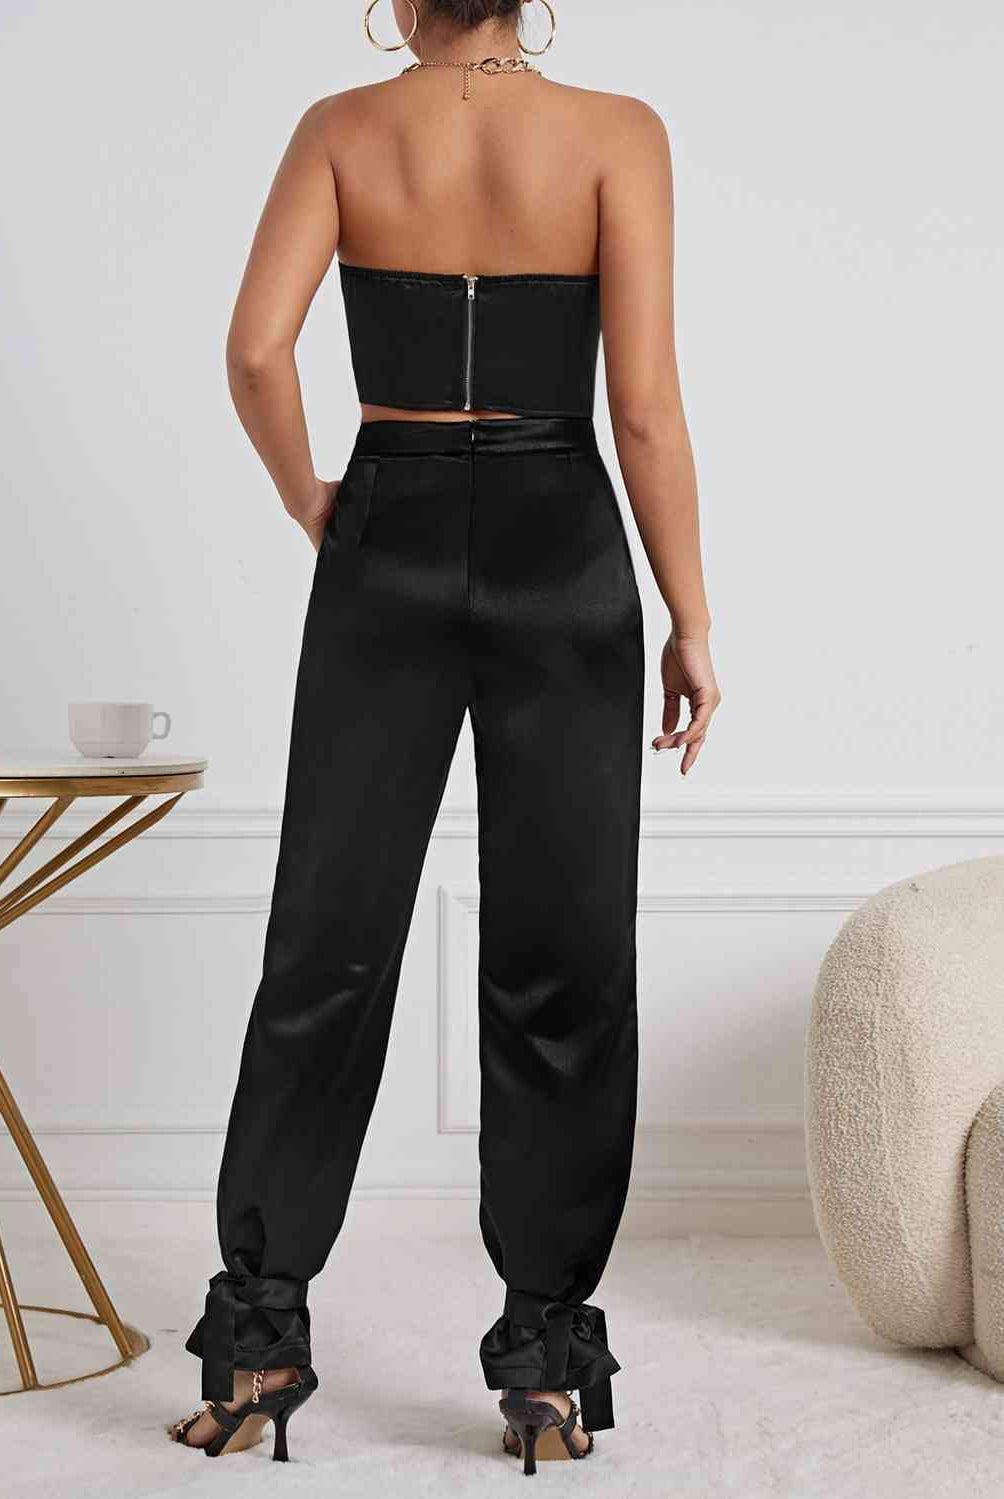 Light Gray You're Worth It Black Knot Detail Tube Top and Pants Set Outfit Sets